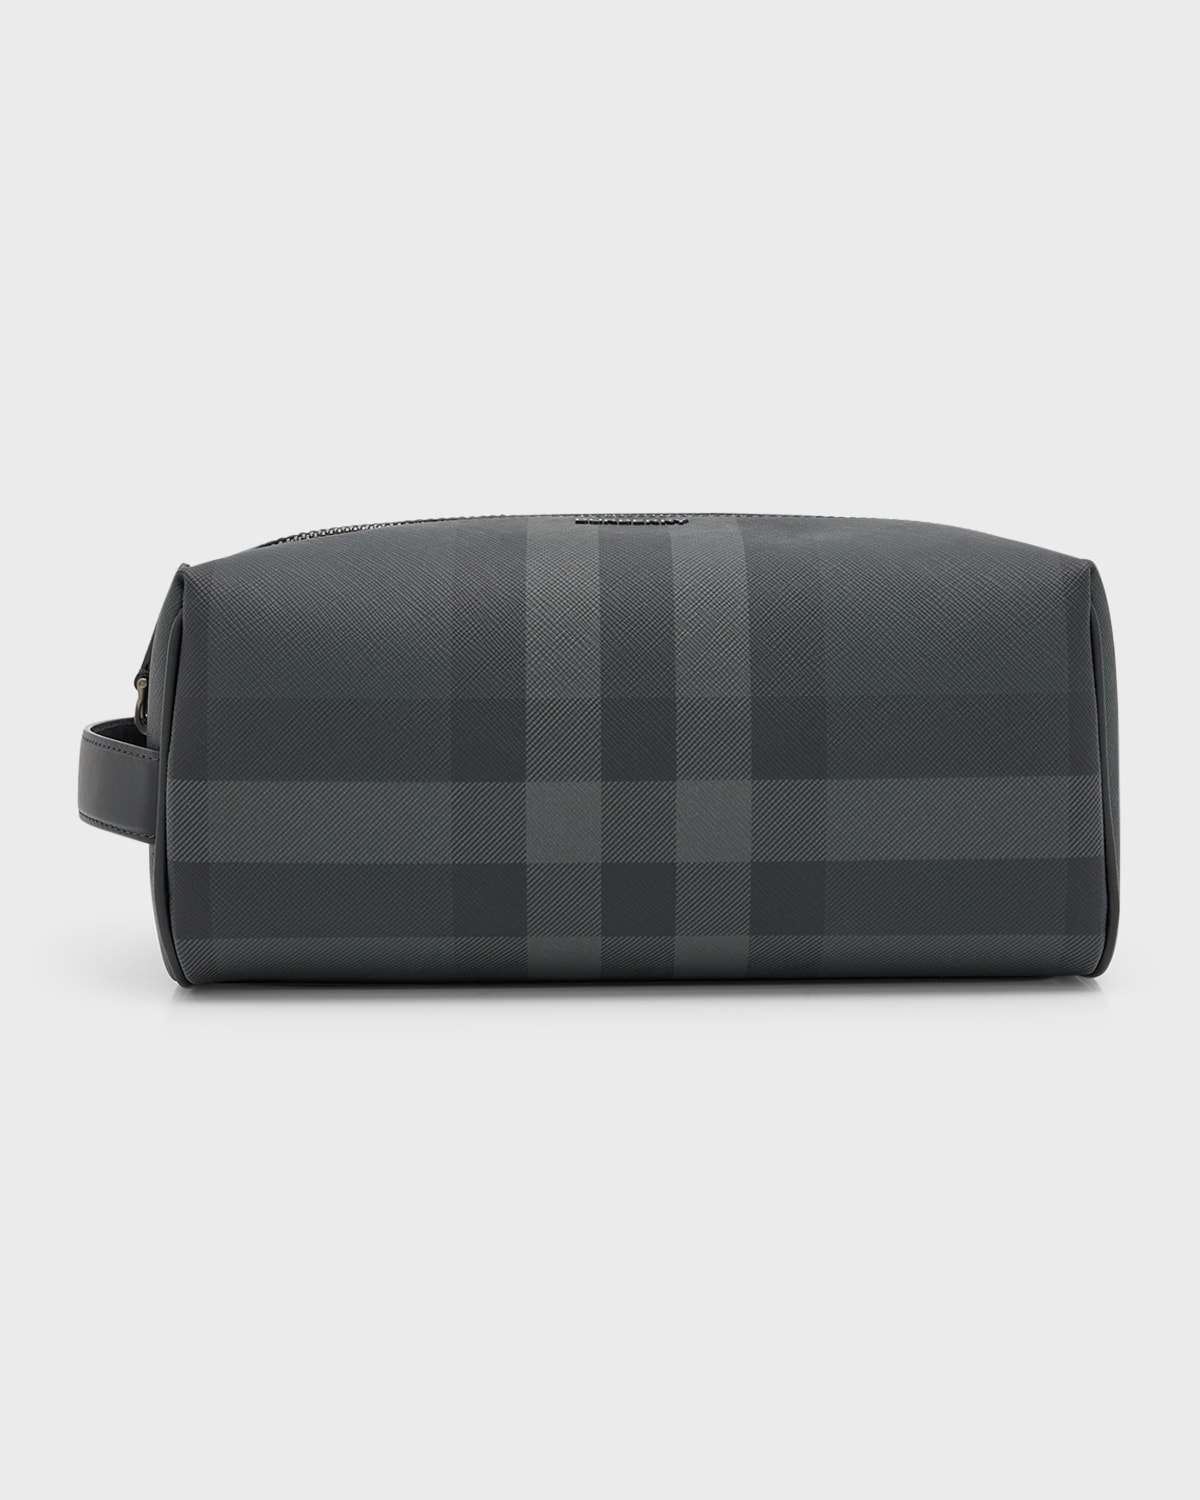 Men's Charcoal Check Leather Travel Zip Pouch